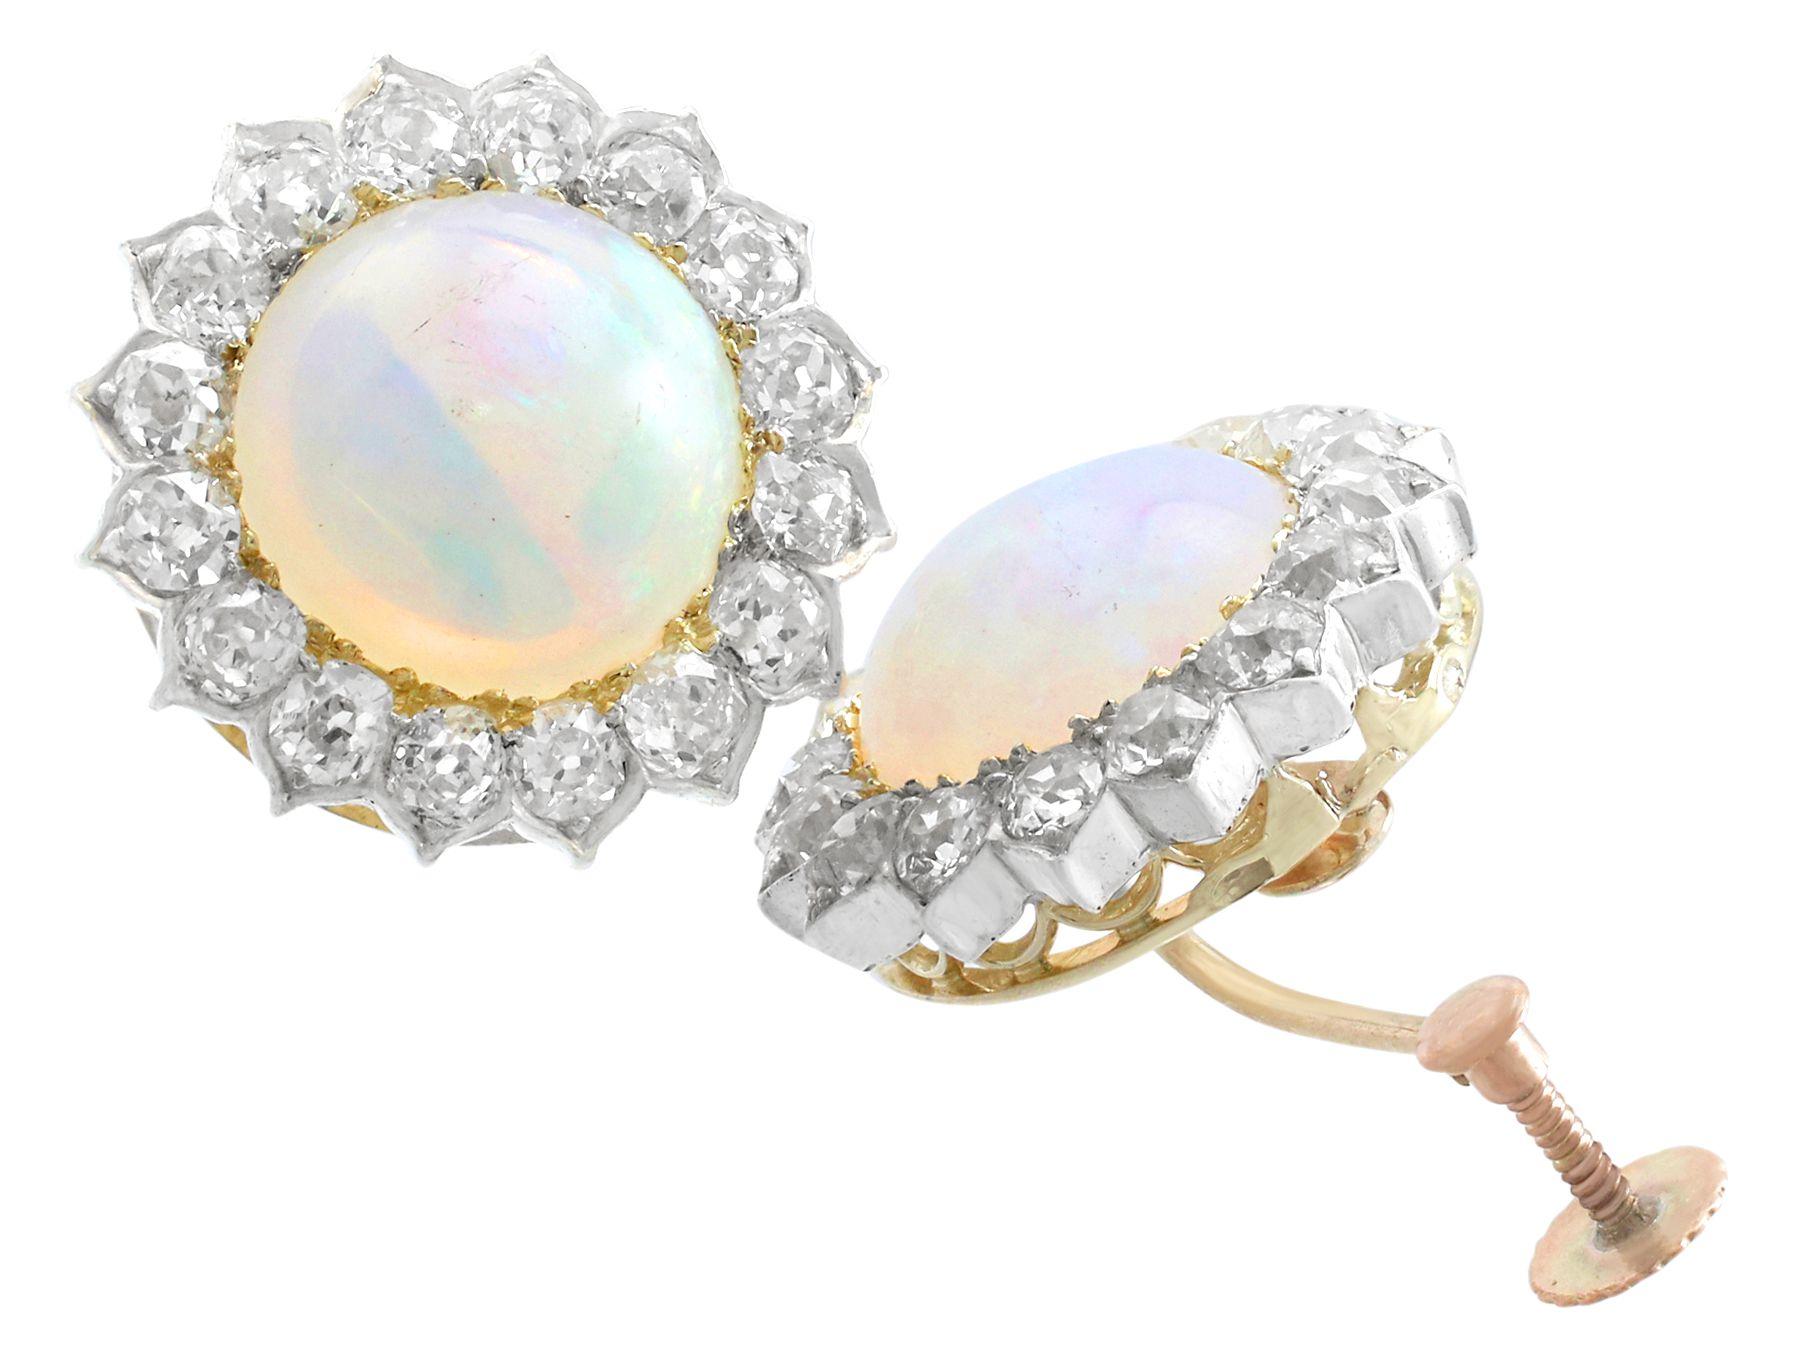 Round Cut Victorian 7.76Ct Cabochon Cut Opal and 2.05 Carat Diamond Yellow Gold Earrings For Sale